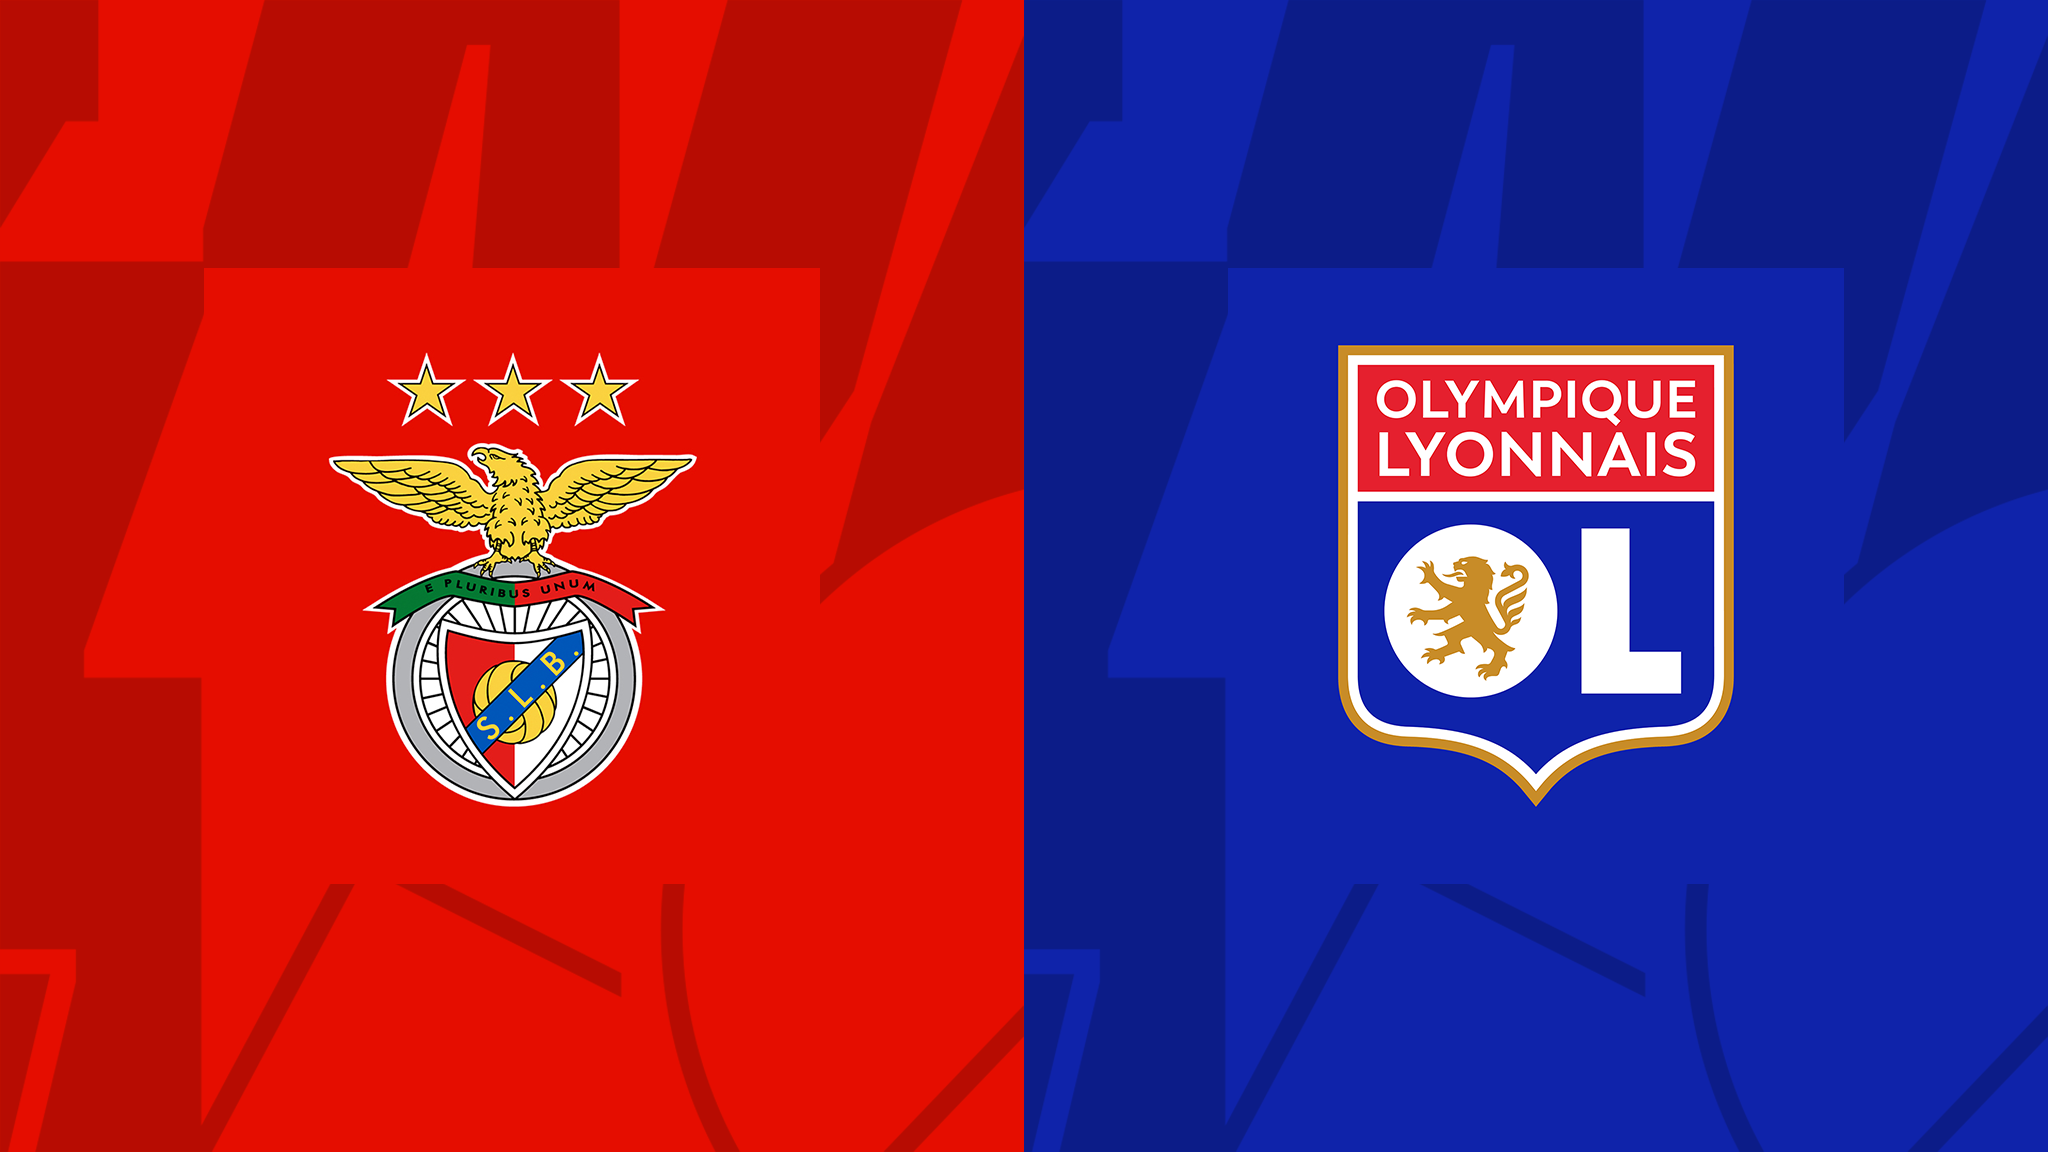 Benfica vs. Lyon: Date, kick-off time and how to watch UEFA Women's Champions League quarter-final match